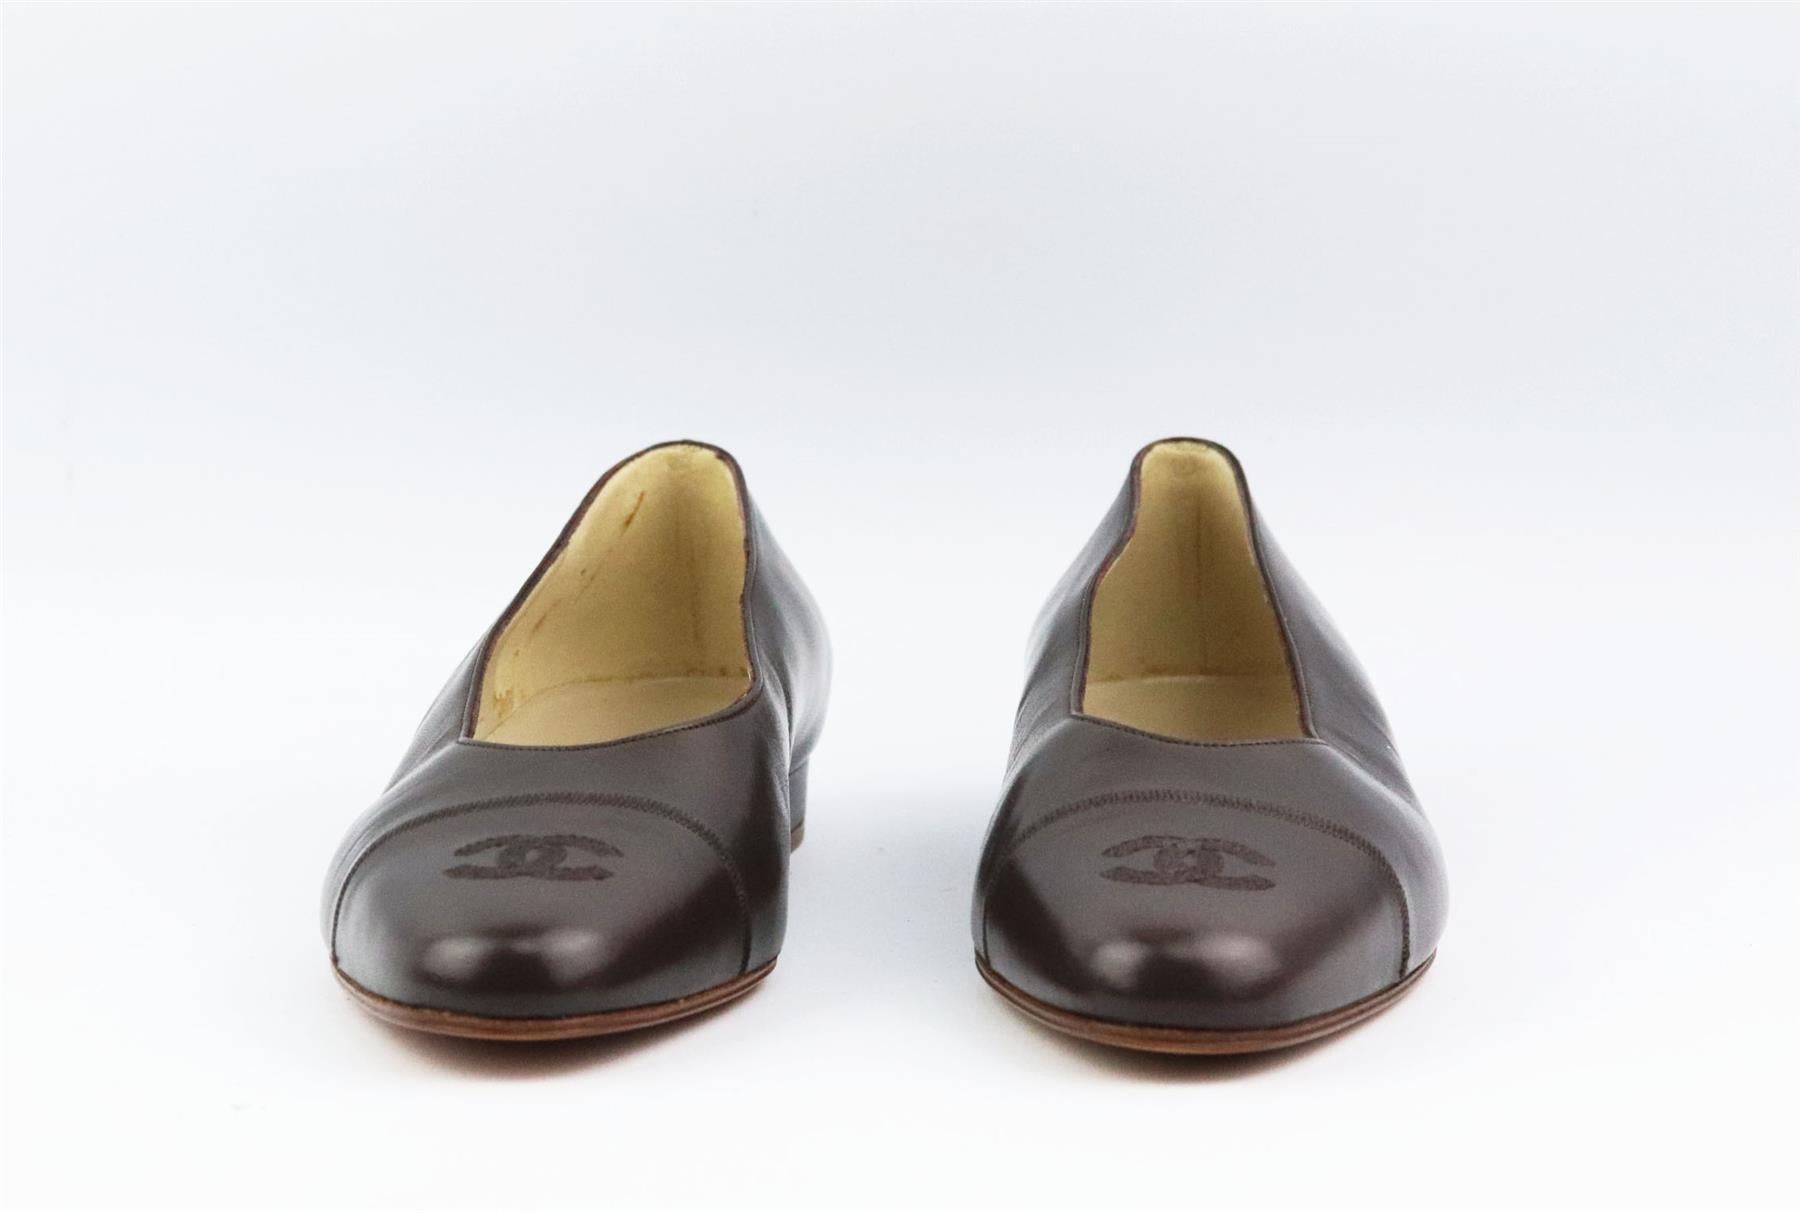 These vintage ballerina flats by Chanel are always stand out pieces, even designs as classic as these flats, made in Italy from brown leather that are balanced out with an almond toe and CC embroidered detail. Sole measures approximately 10 mm/ 0.4